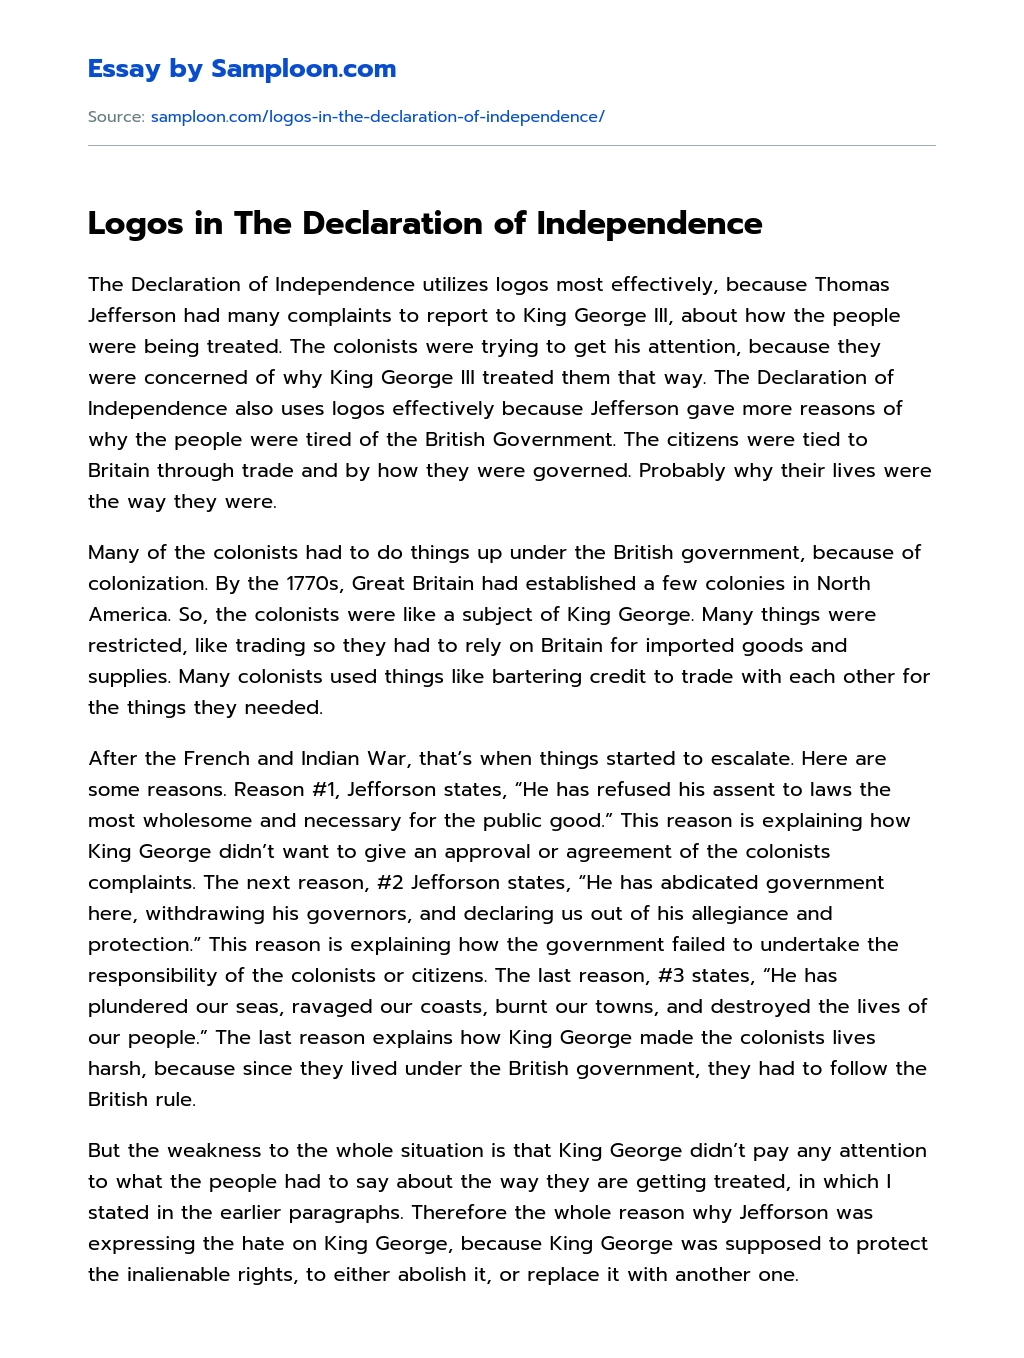 Logos in The Declaration of Independence essay